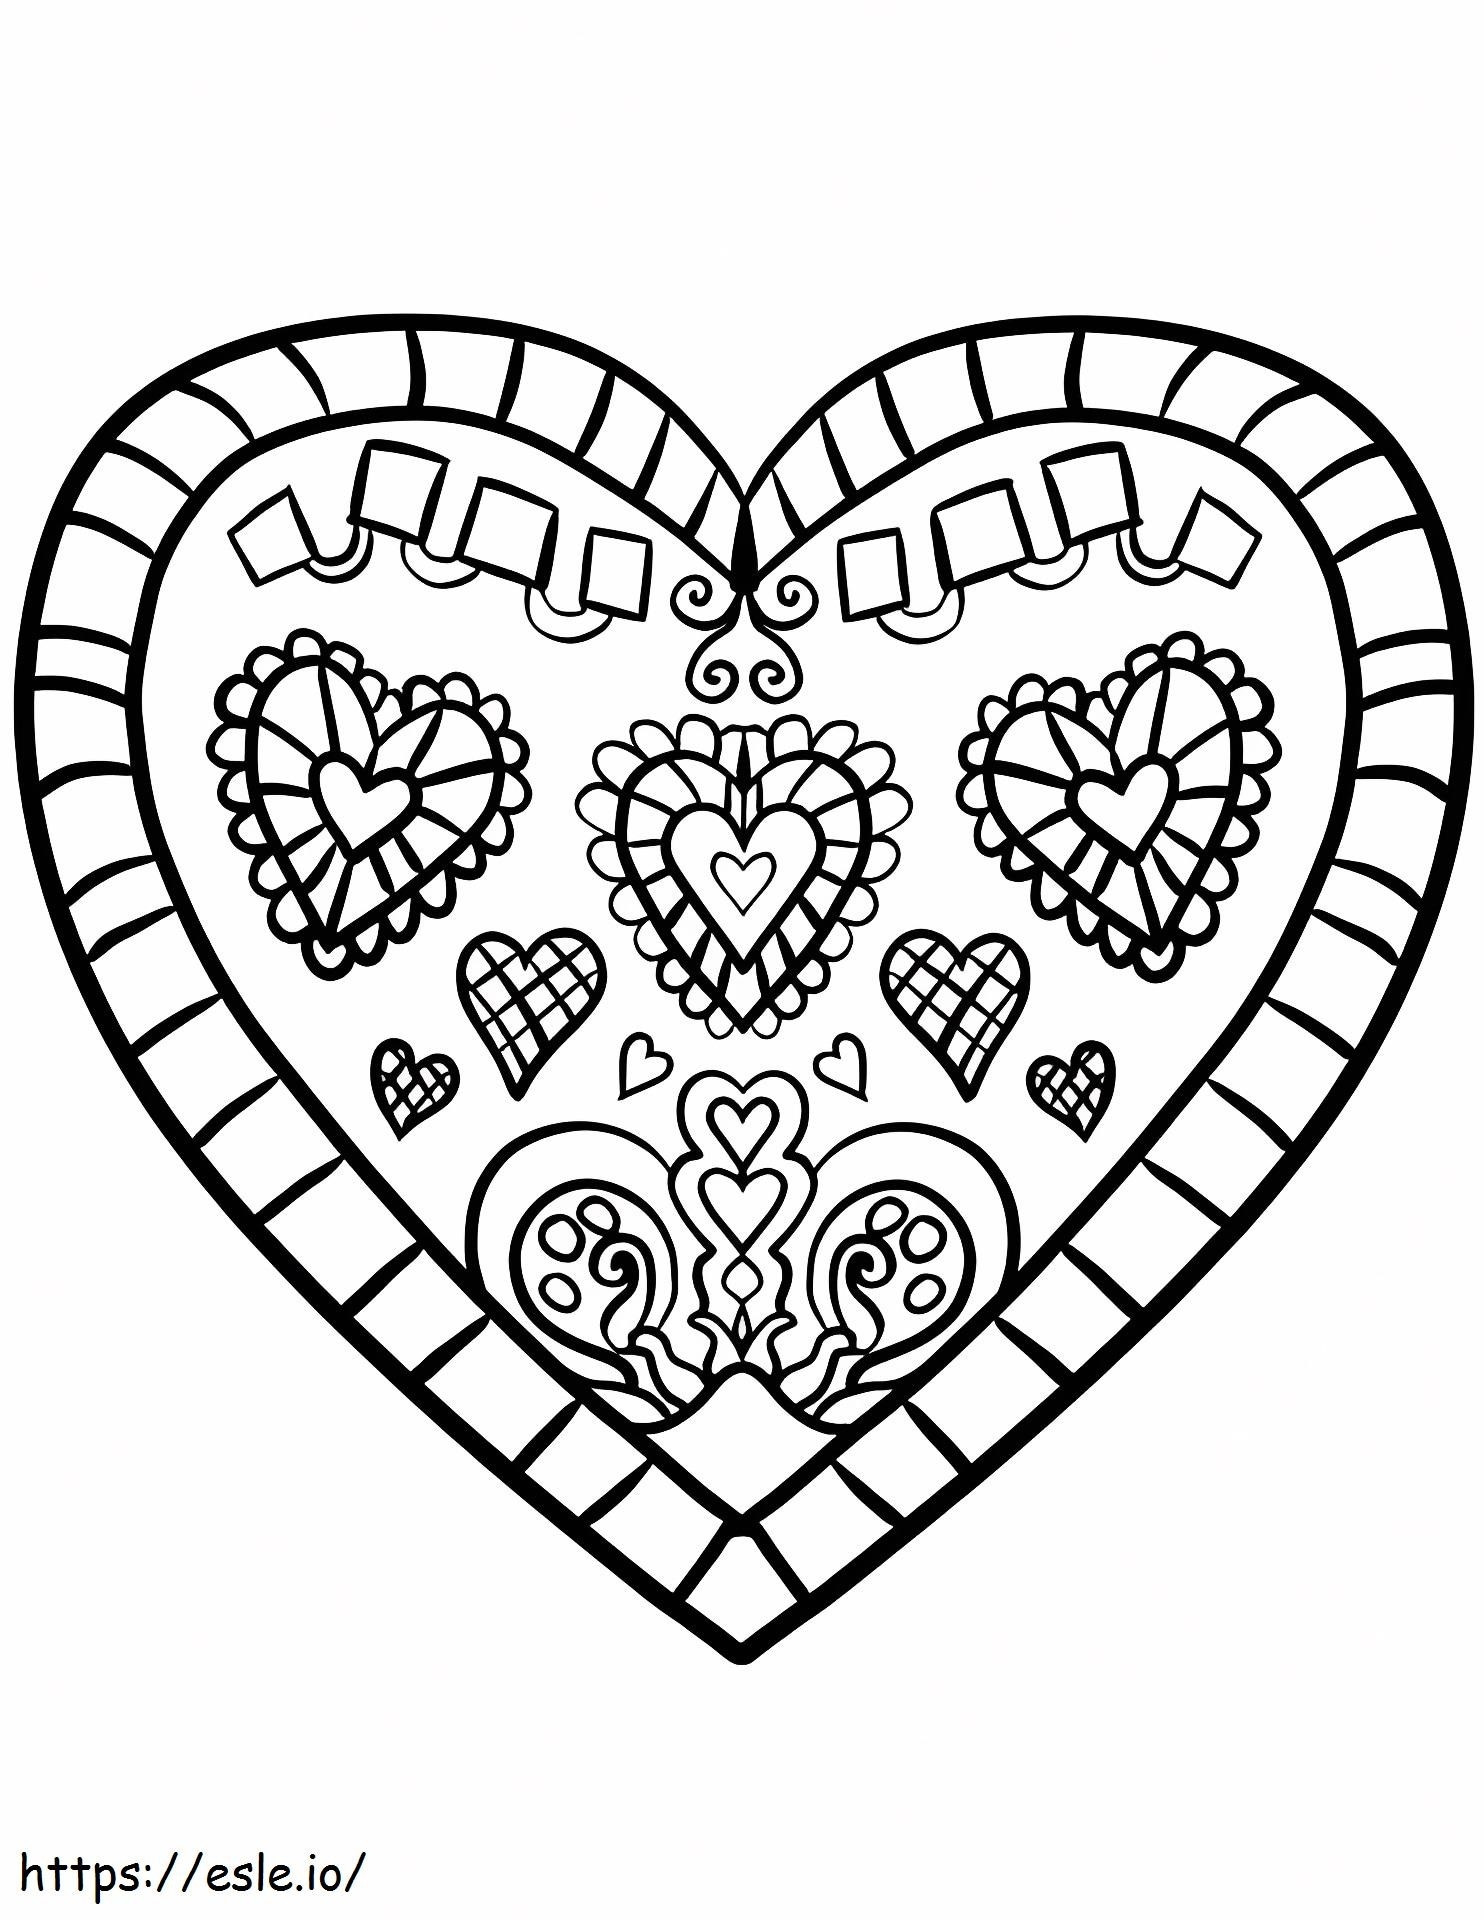 A Decorated Heart 1 coloring page